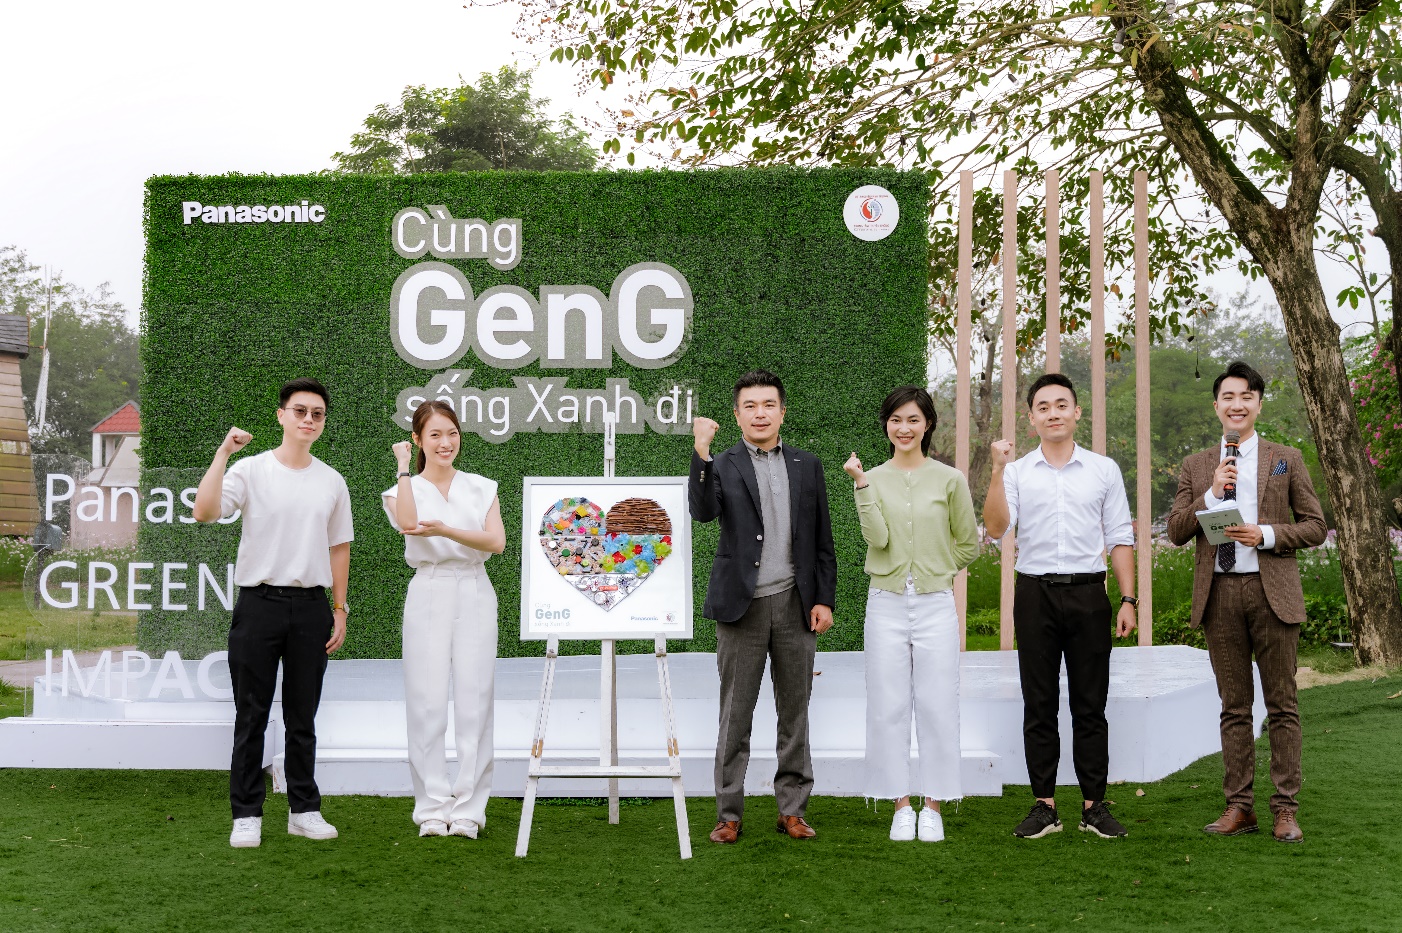 Photo: The “Live Green and Wellness with Gen G” campaign with dynamic and enthusiastic Gen G ambassadors of environmental activities